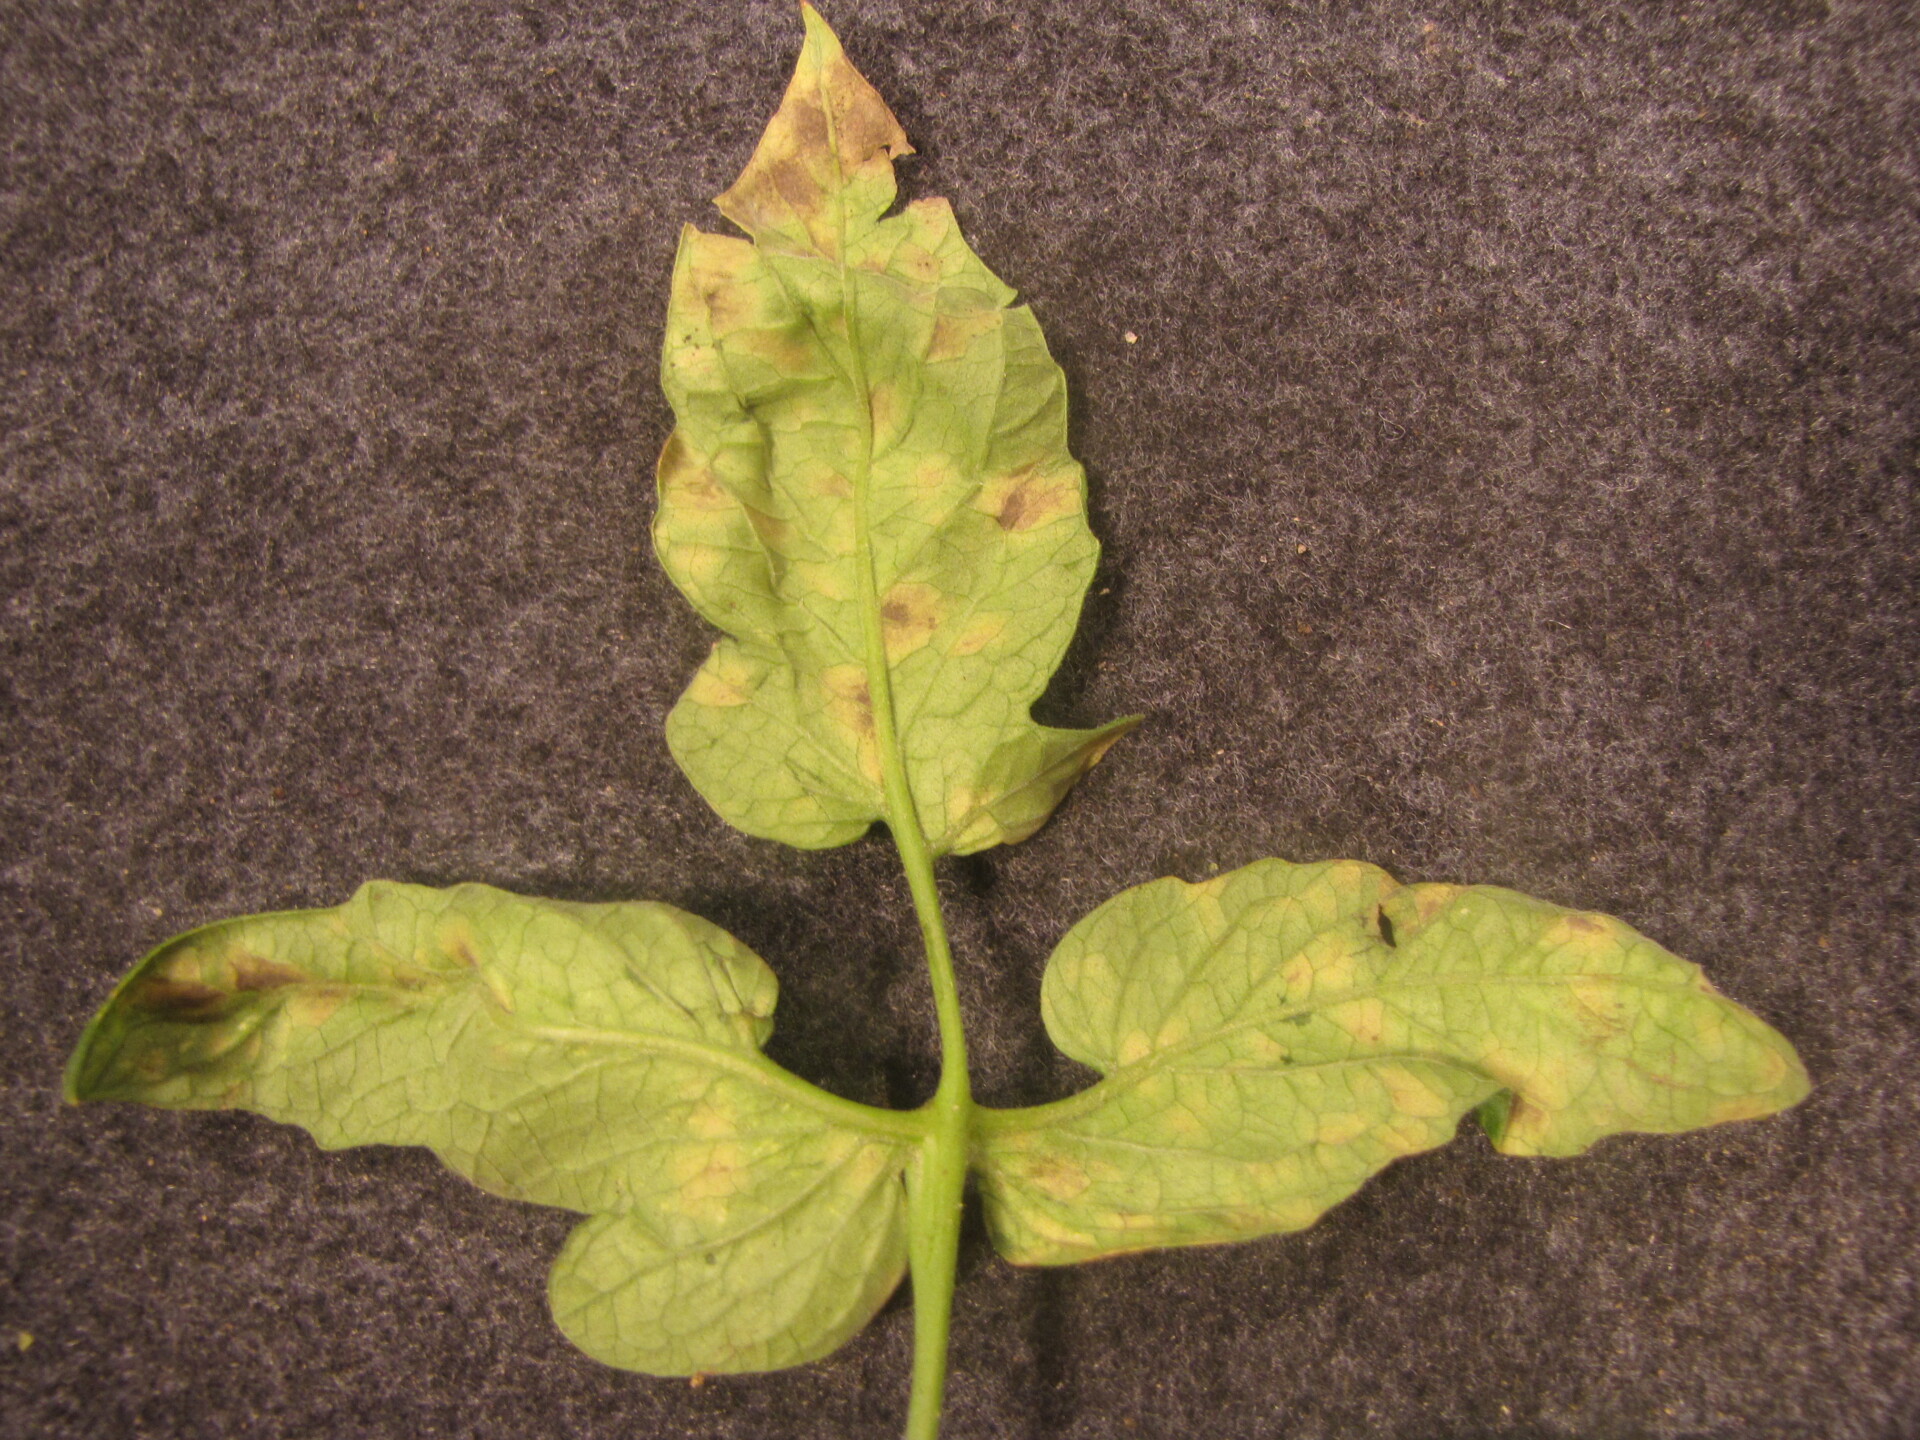 Another look at the underside of a tomato leaf with sporulation of cercospora leaf mold.